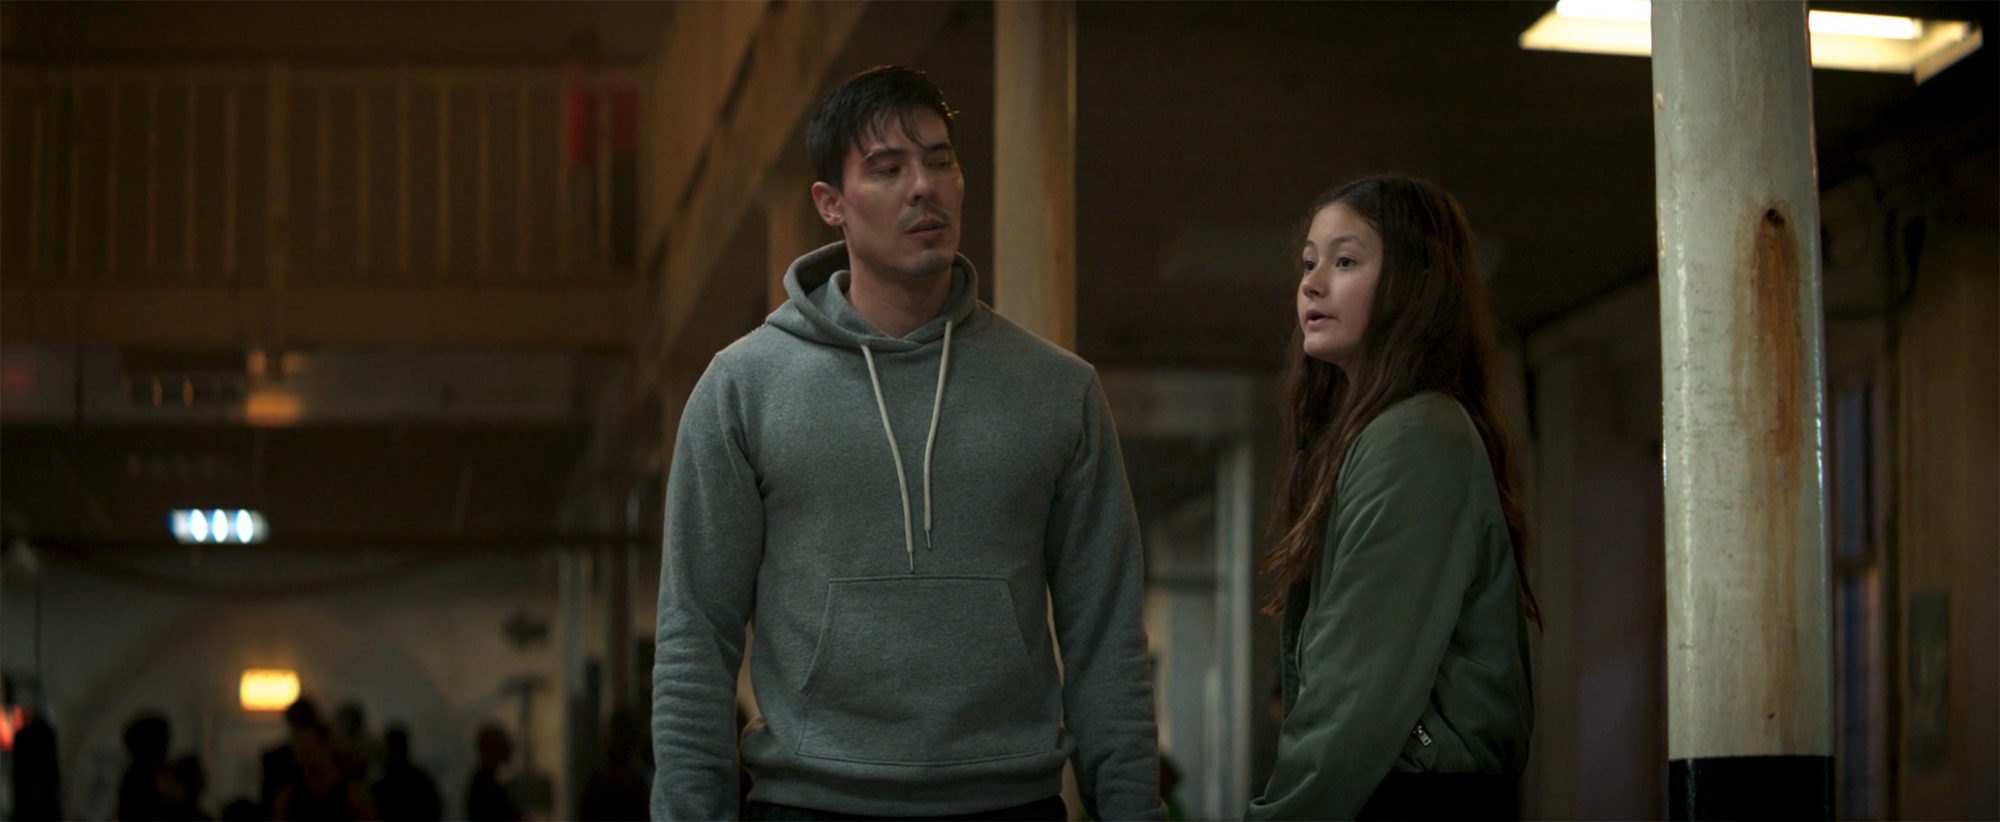 Cole Young (Lewis Tan) is consoled by his daughter Emily (Matilda Kimber) after losing a match in a still from the New Line Cinemas film "Mortal Kombat."